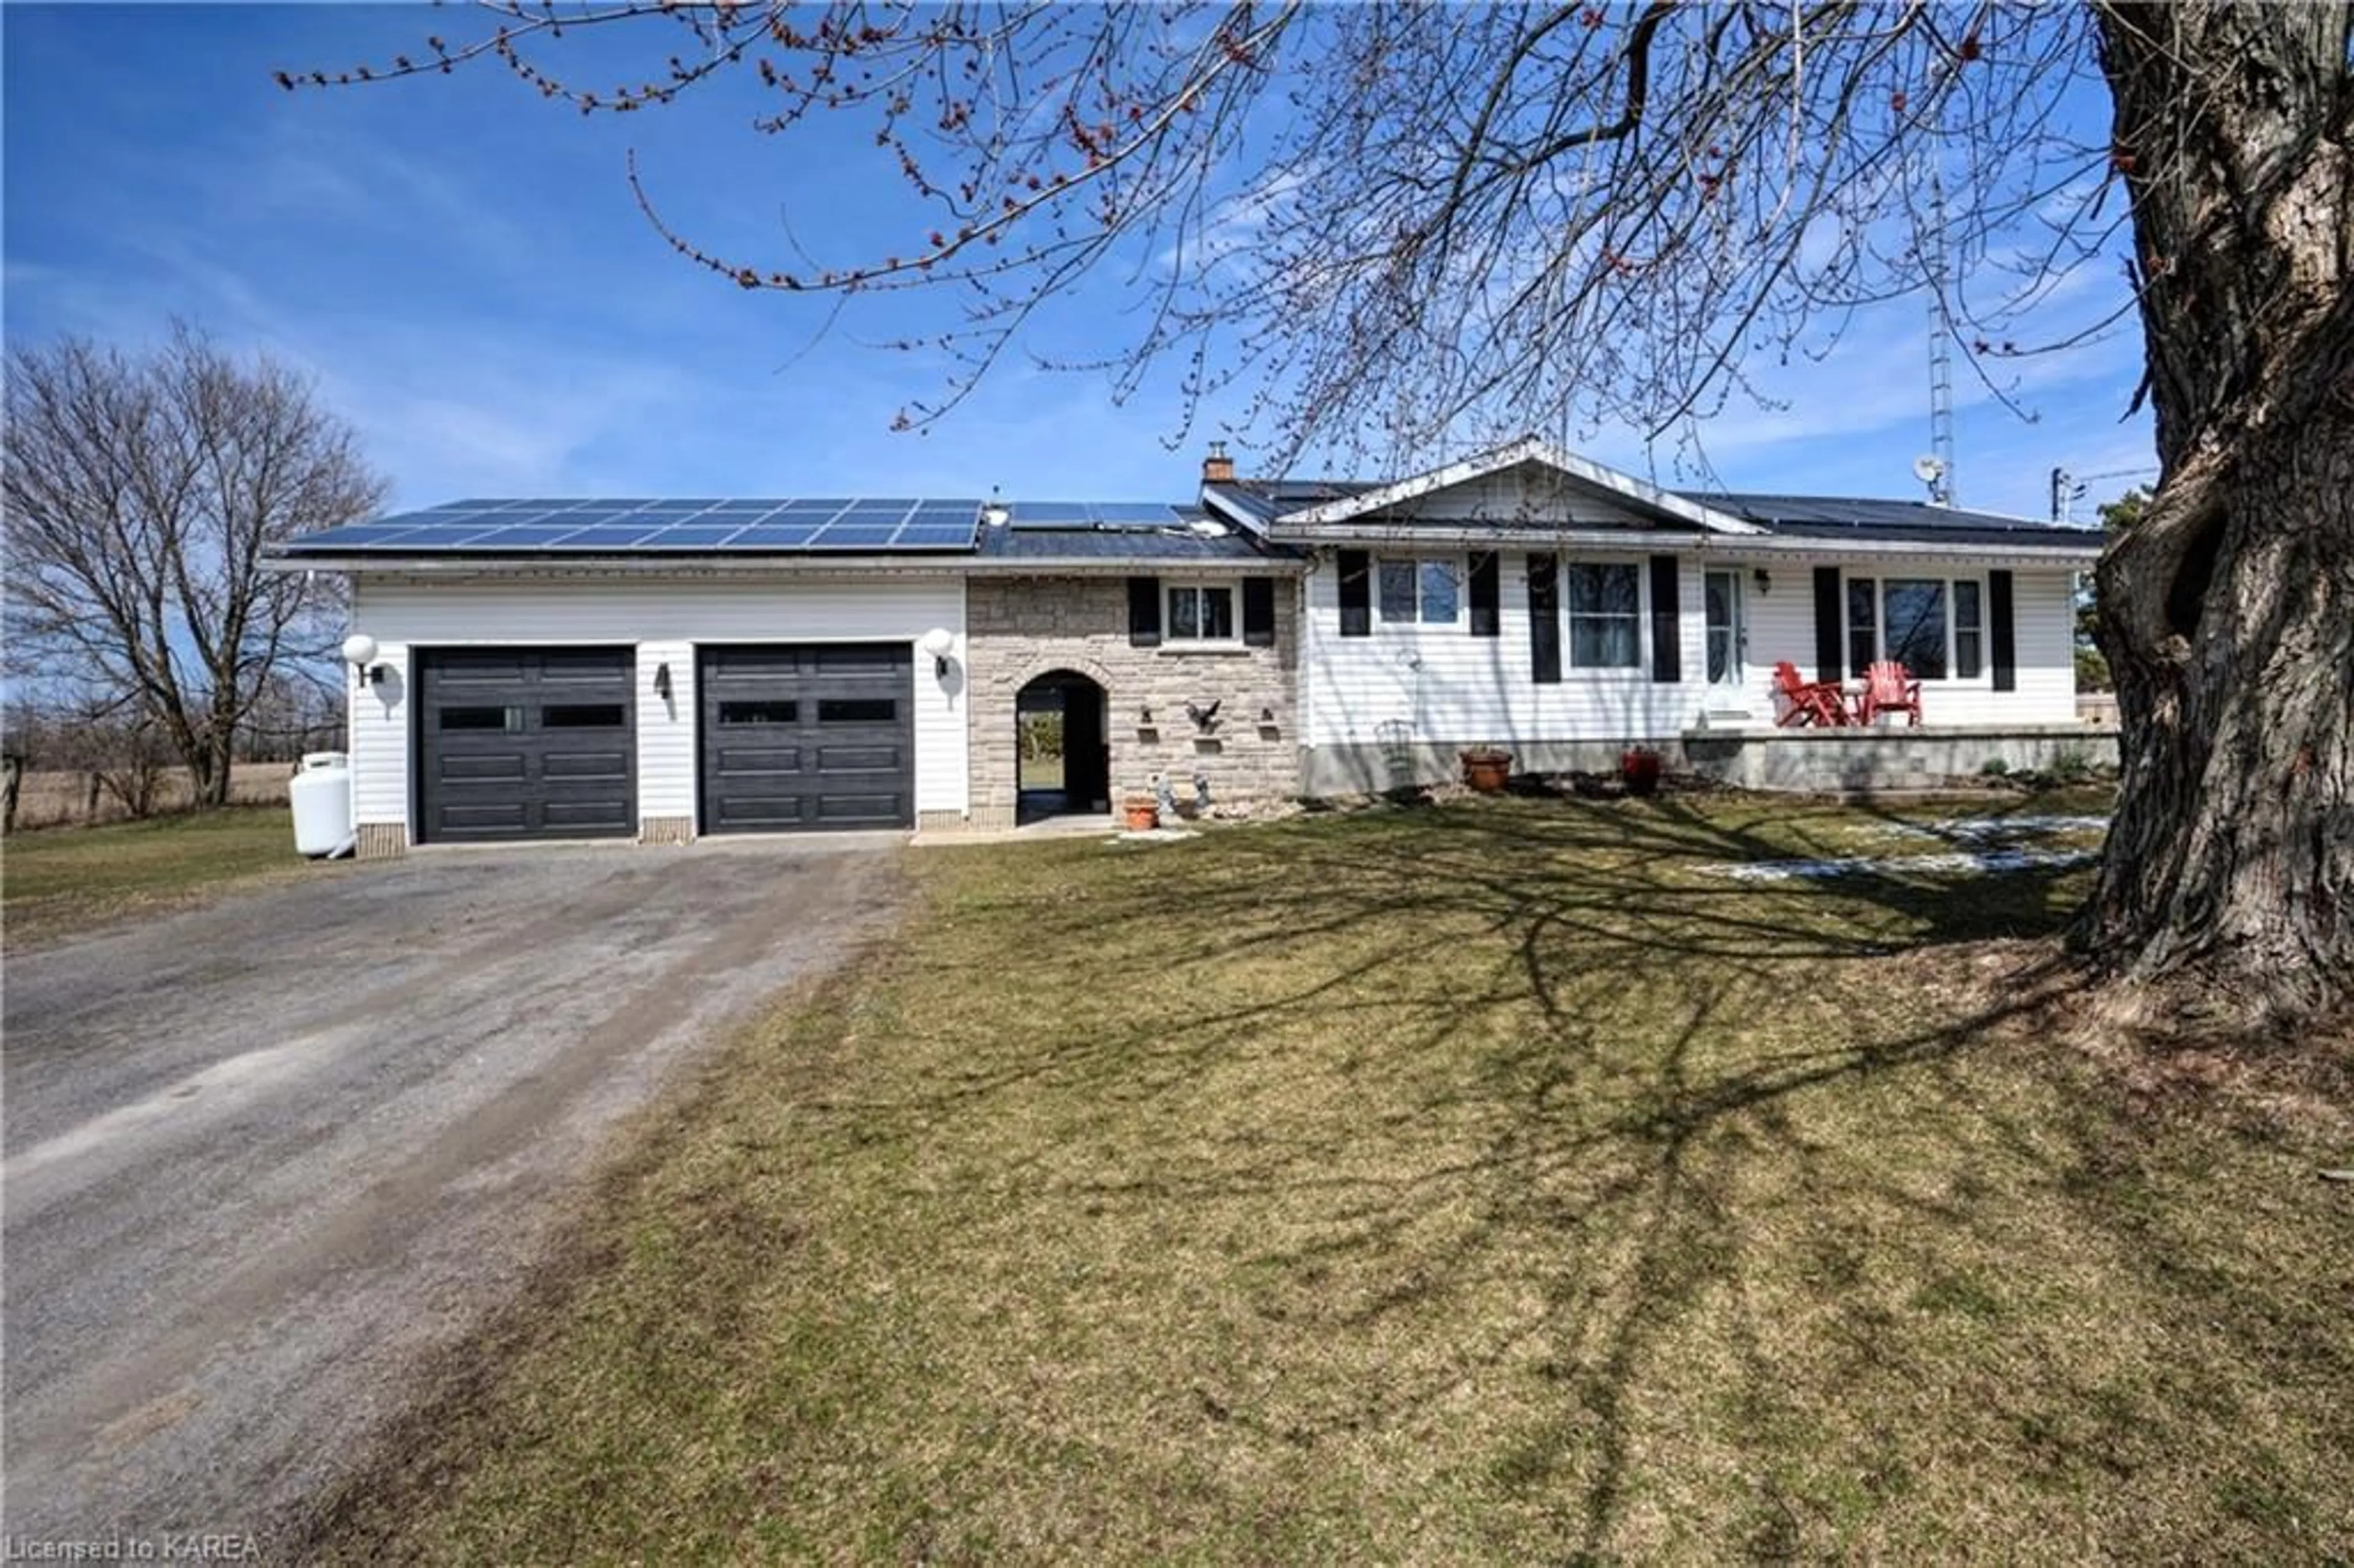 Frontside or backside of a home for 3958 Petworth Rd Rd, Harrowsmith Ontario K0H 1V0